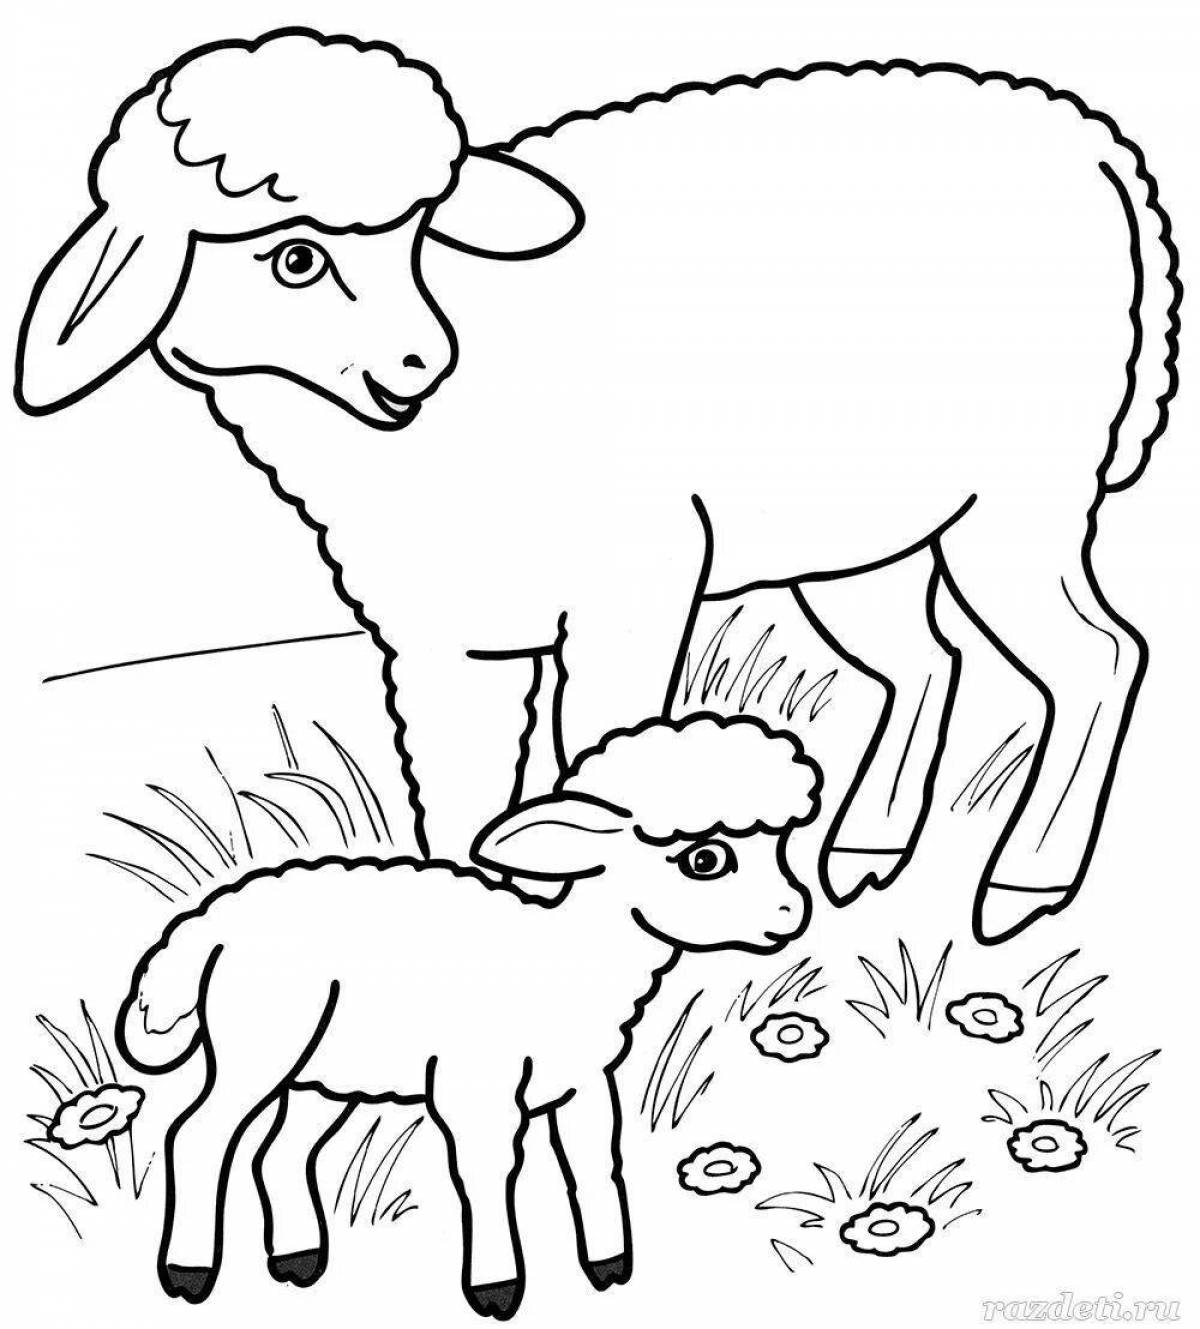 Joyful sheep coloring book for children 5-6 years old